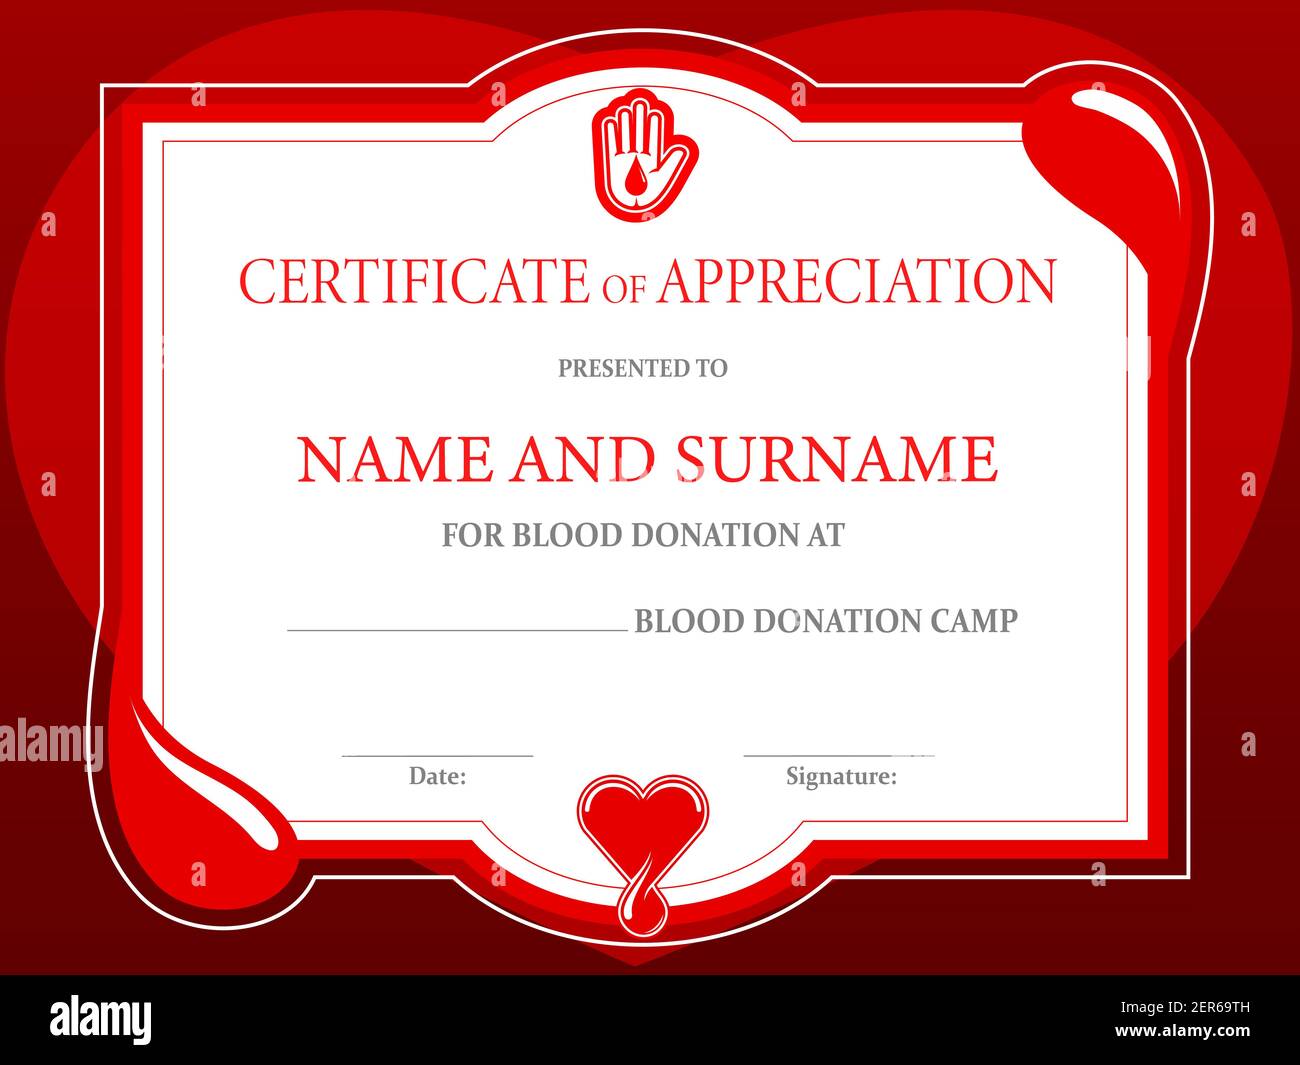 Certificate Of Appreciation For Donation Template